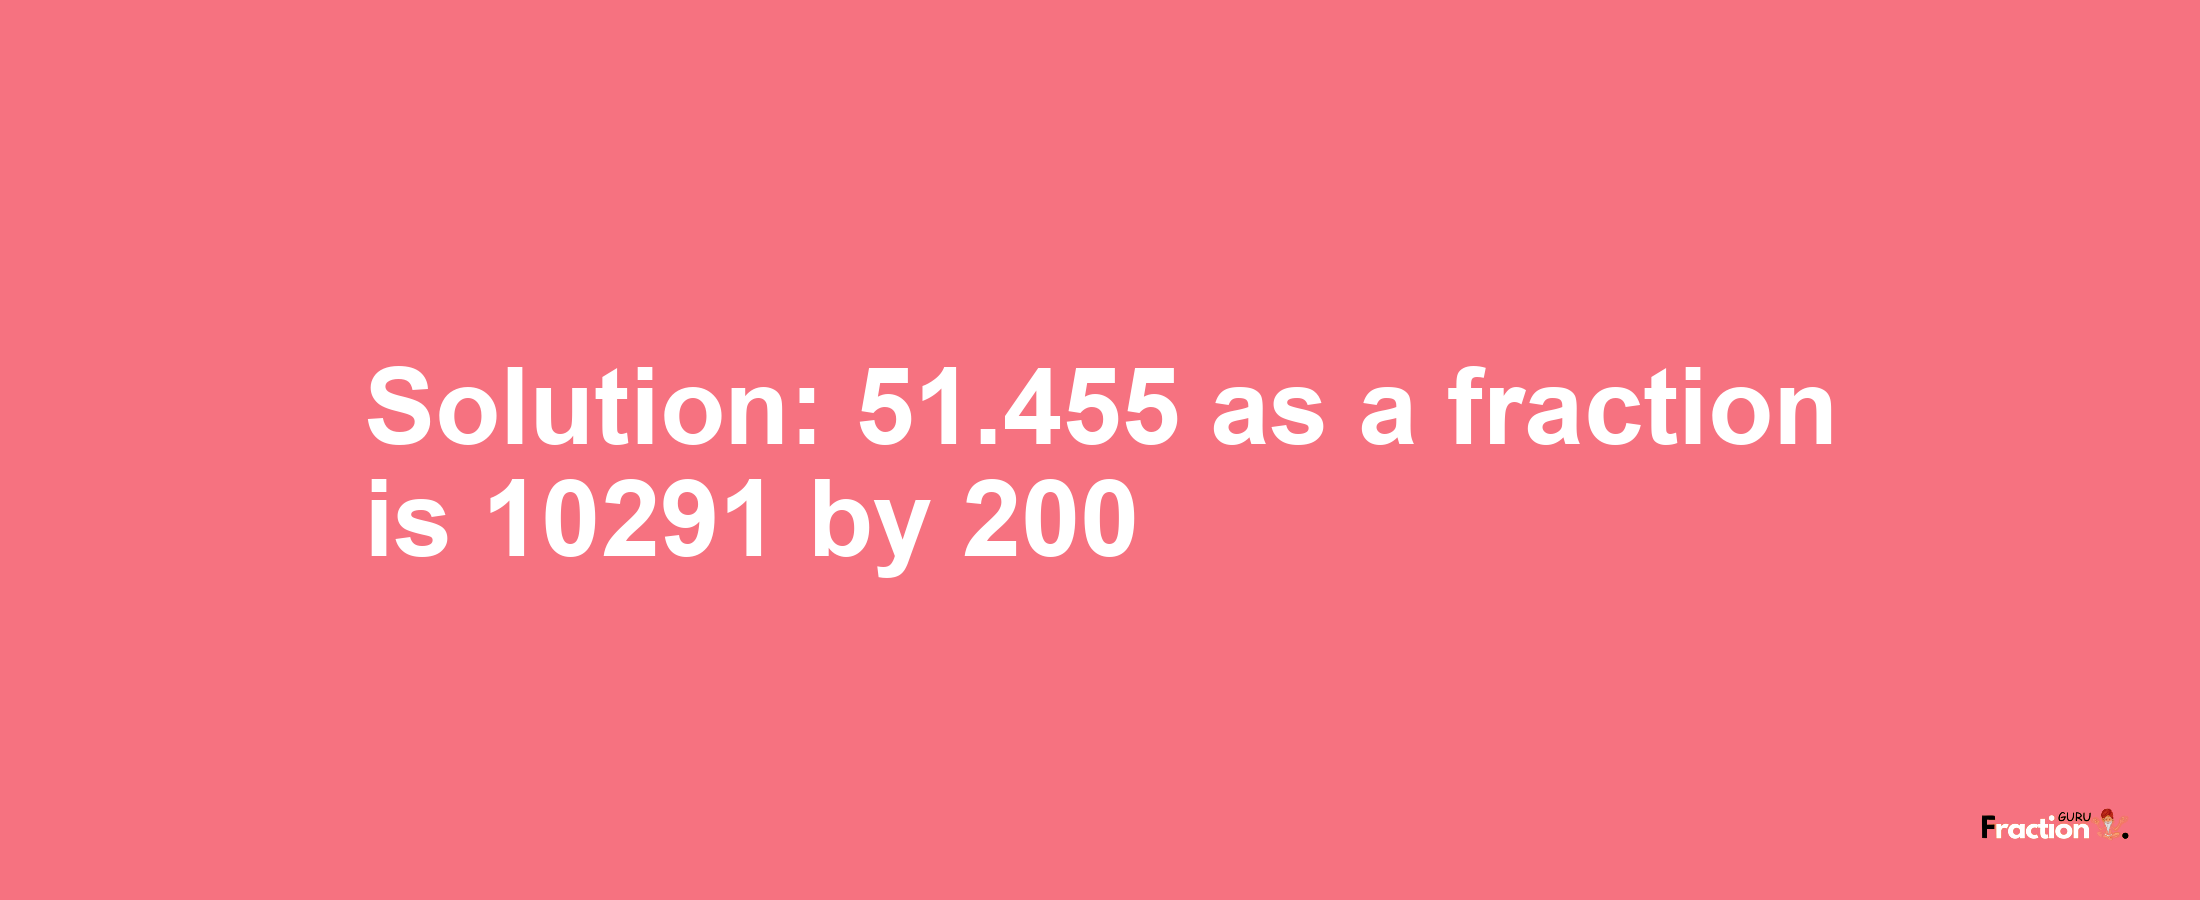 Solution:51.455 as a fraction is 10291/200